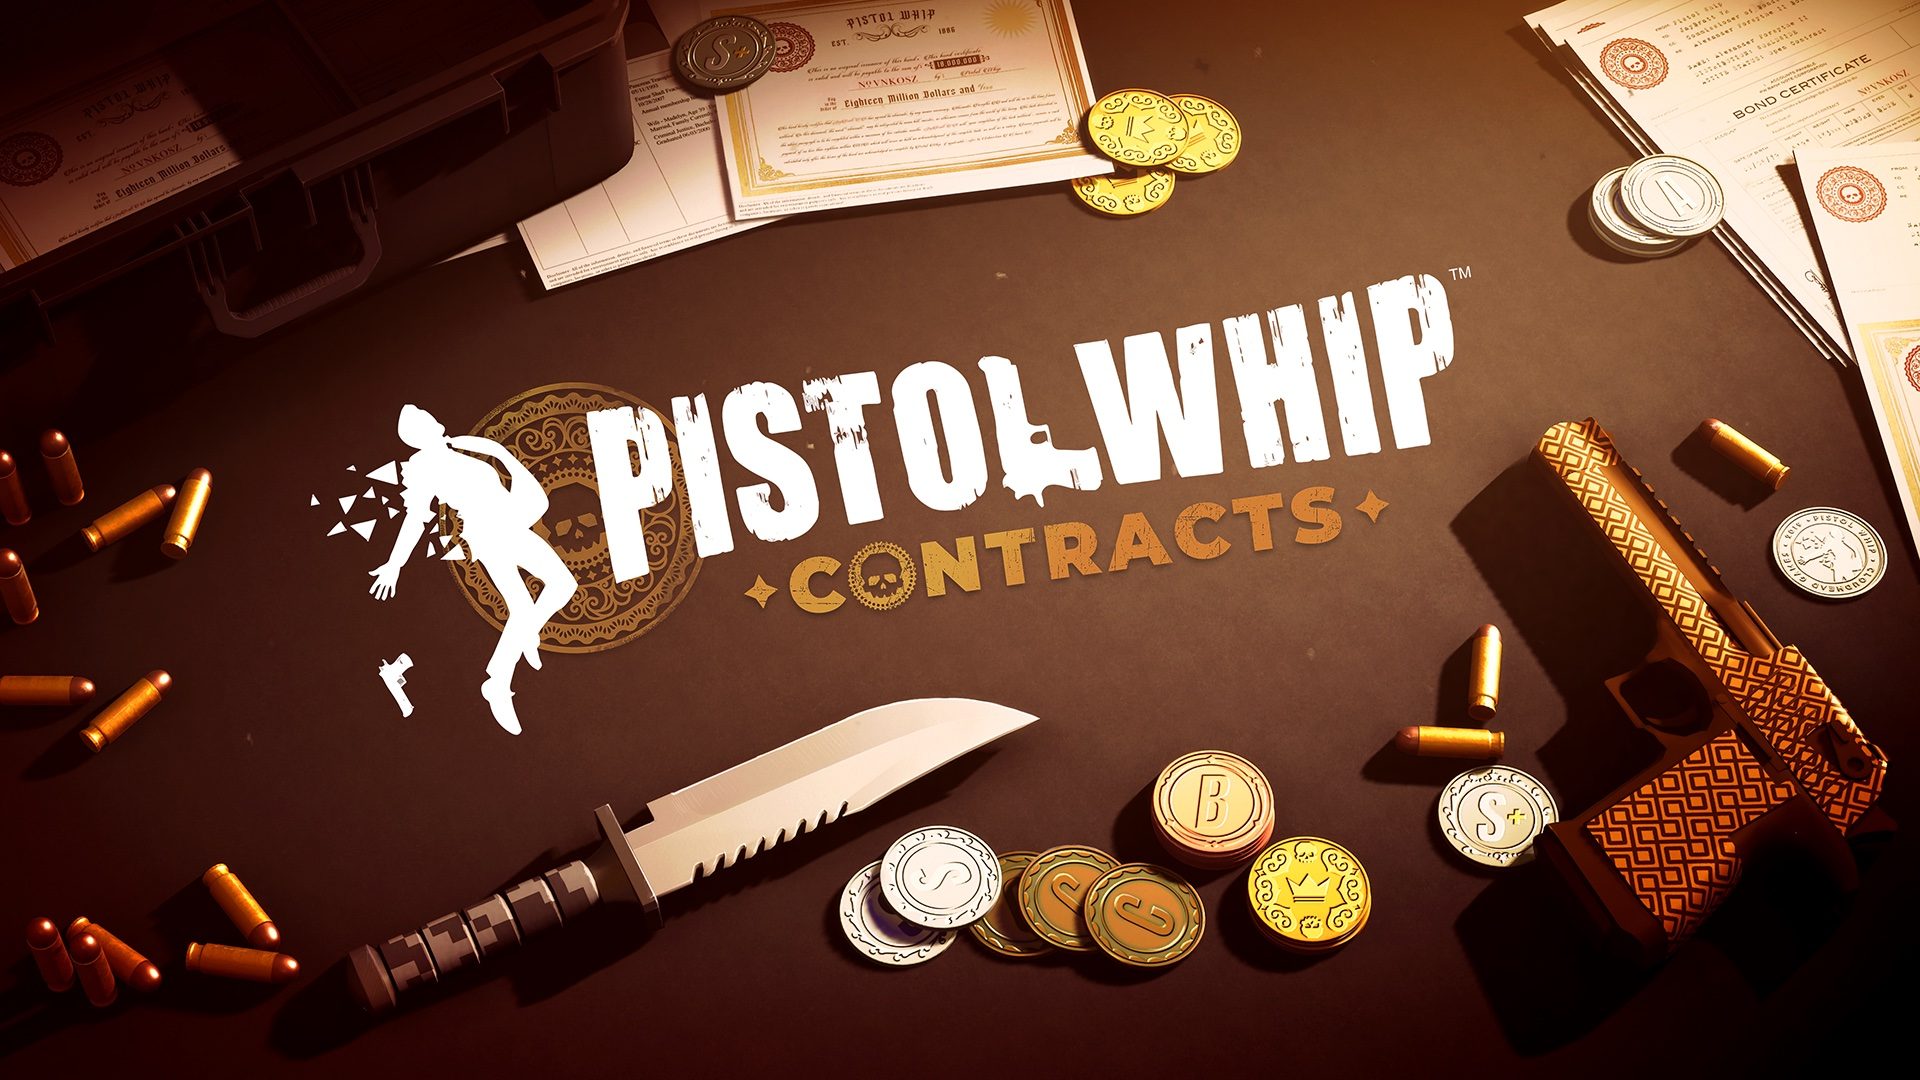 Pistol Whip’s new Contracts feature drags players out of retirement June 16 – PlayStation.Blog